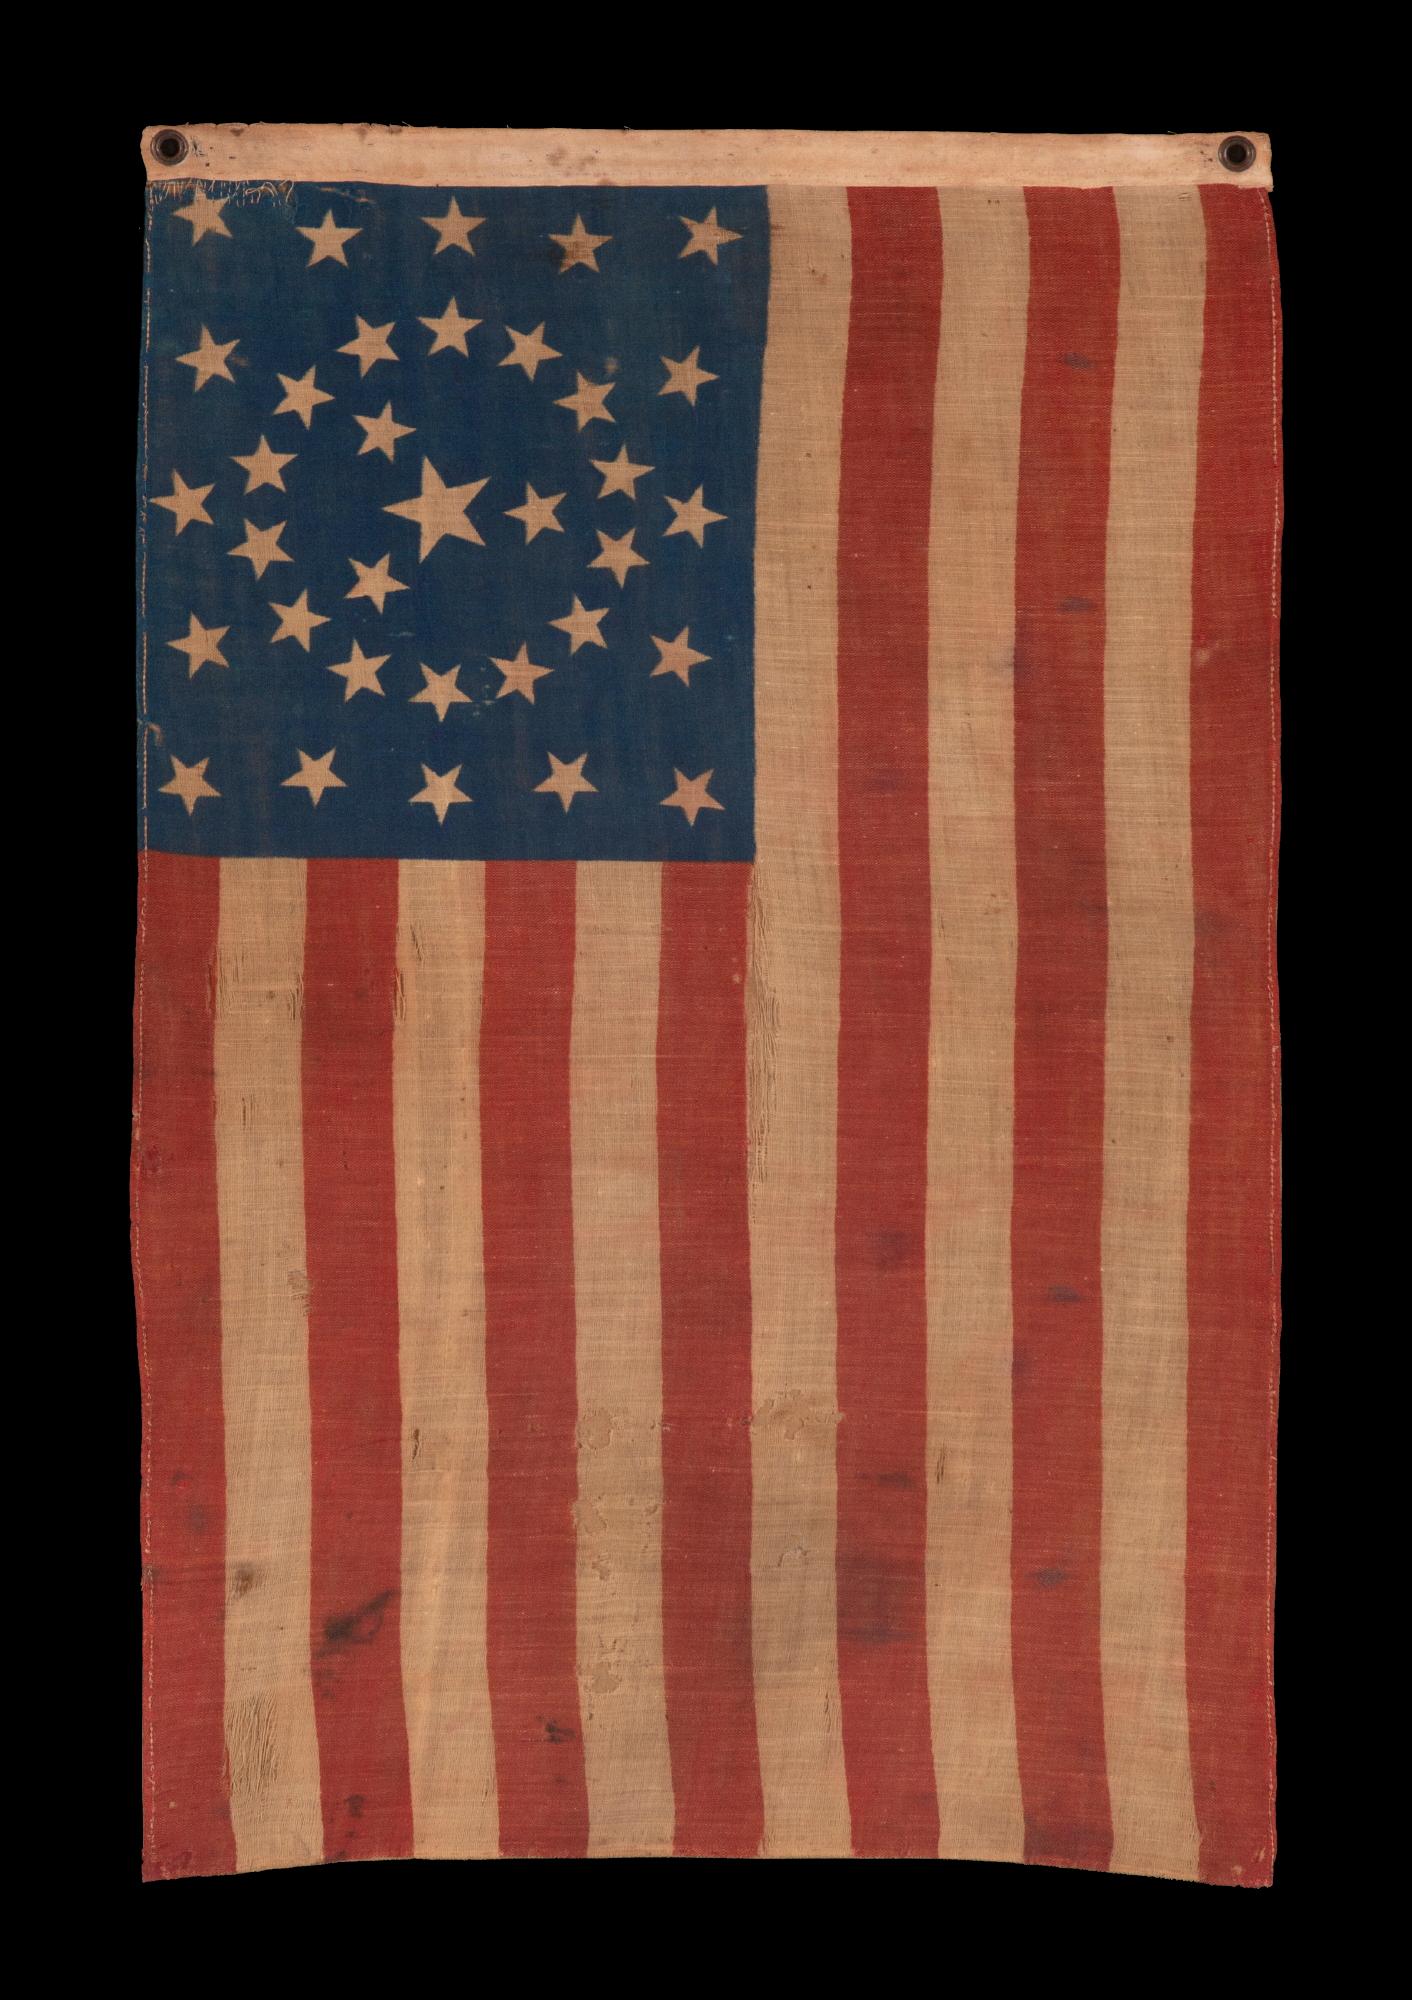 34 star antique american flag with an exceptionally rare circle-in-a-square configuration and a “y” formation of stars in the center, one of just three or four known examples in this style; opening two years of the civil war, 1861-1863, kansas